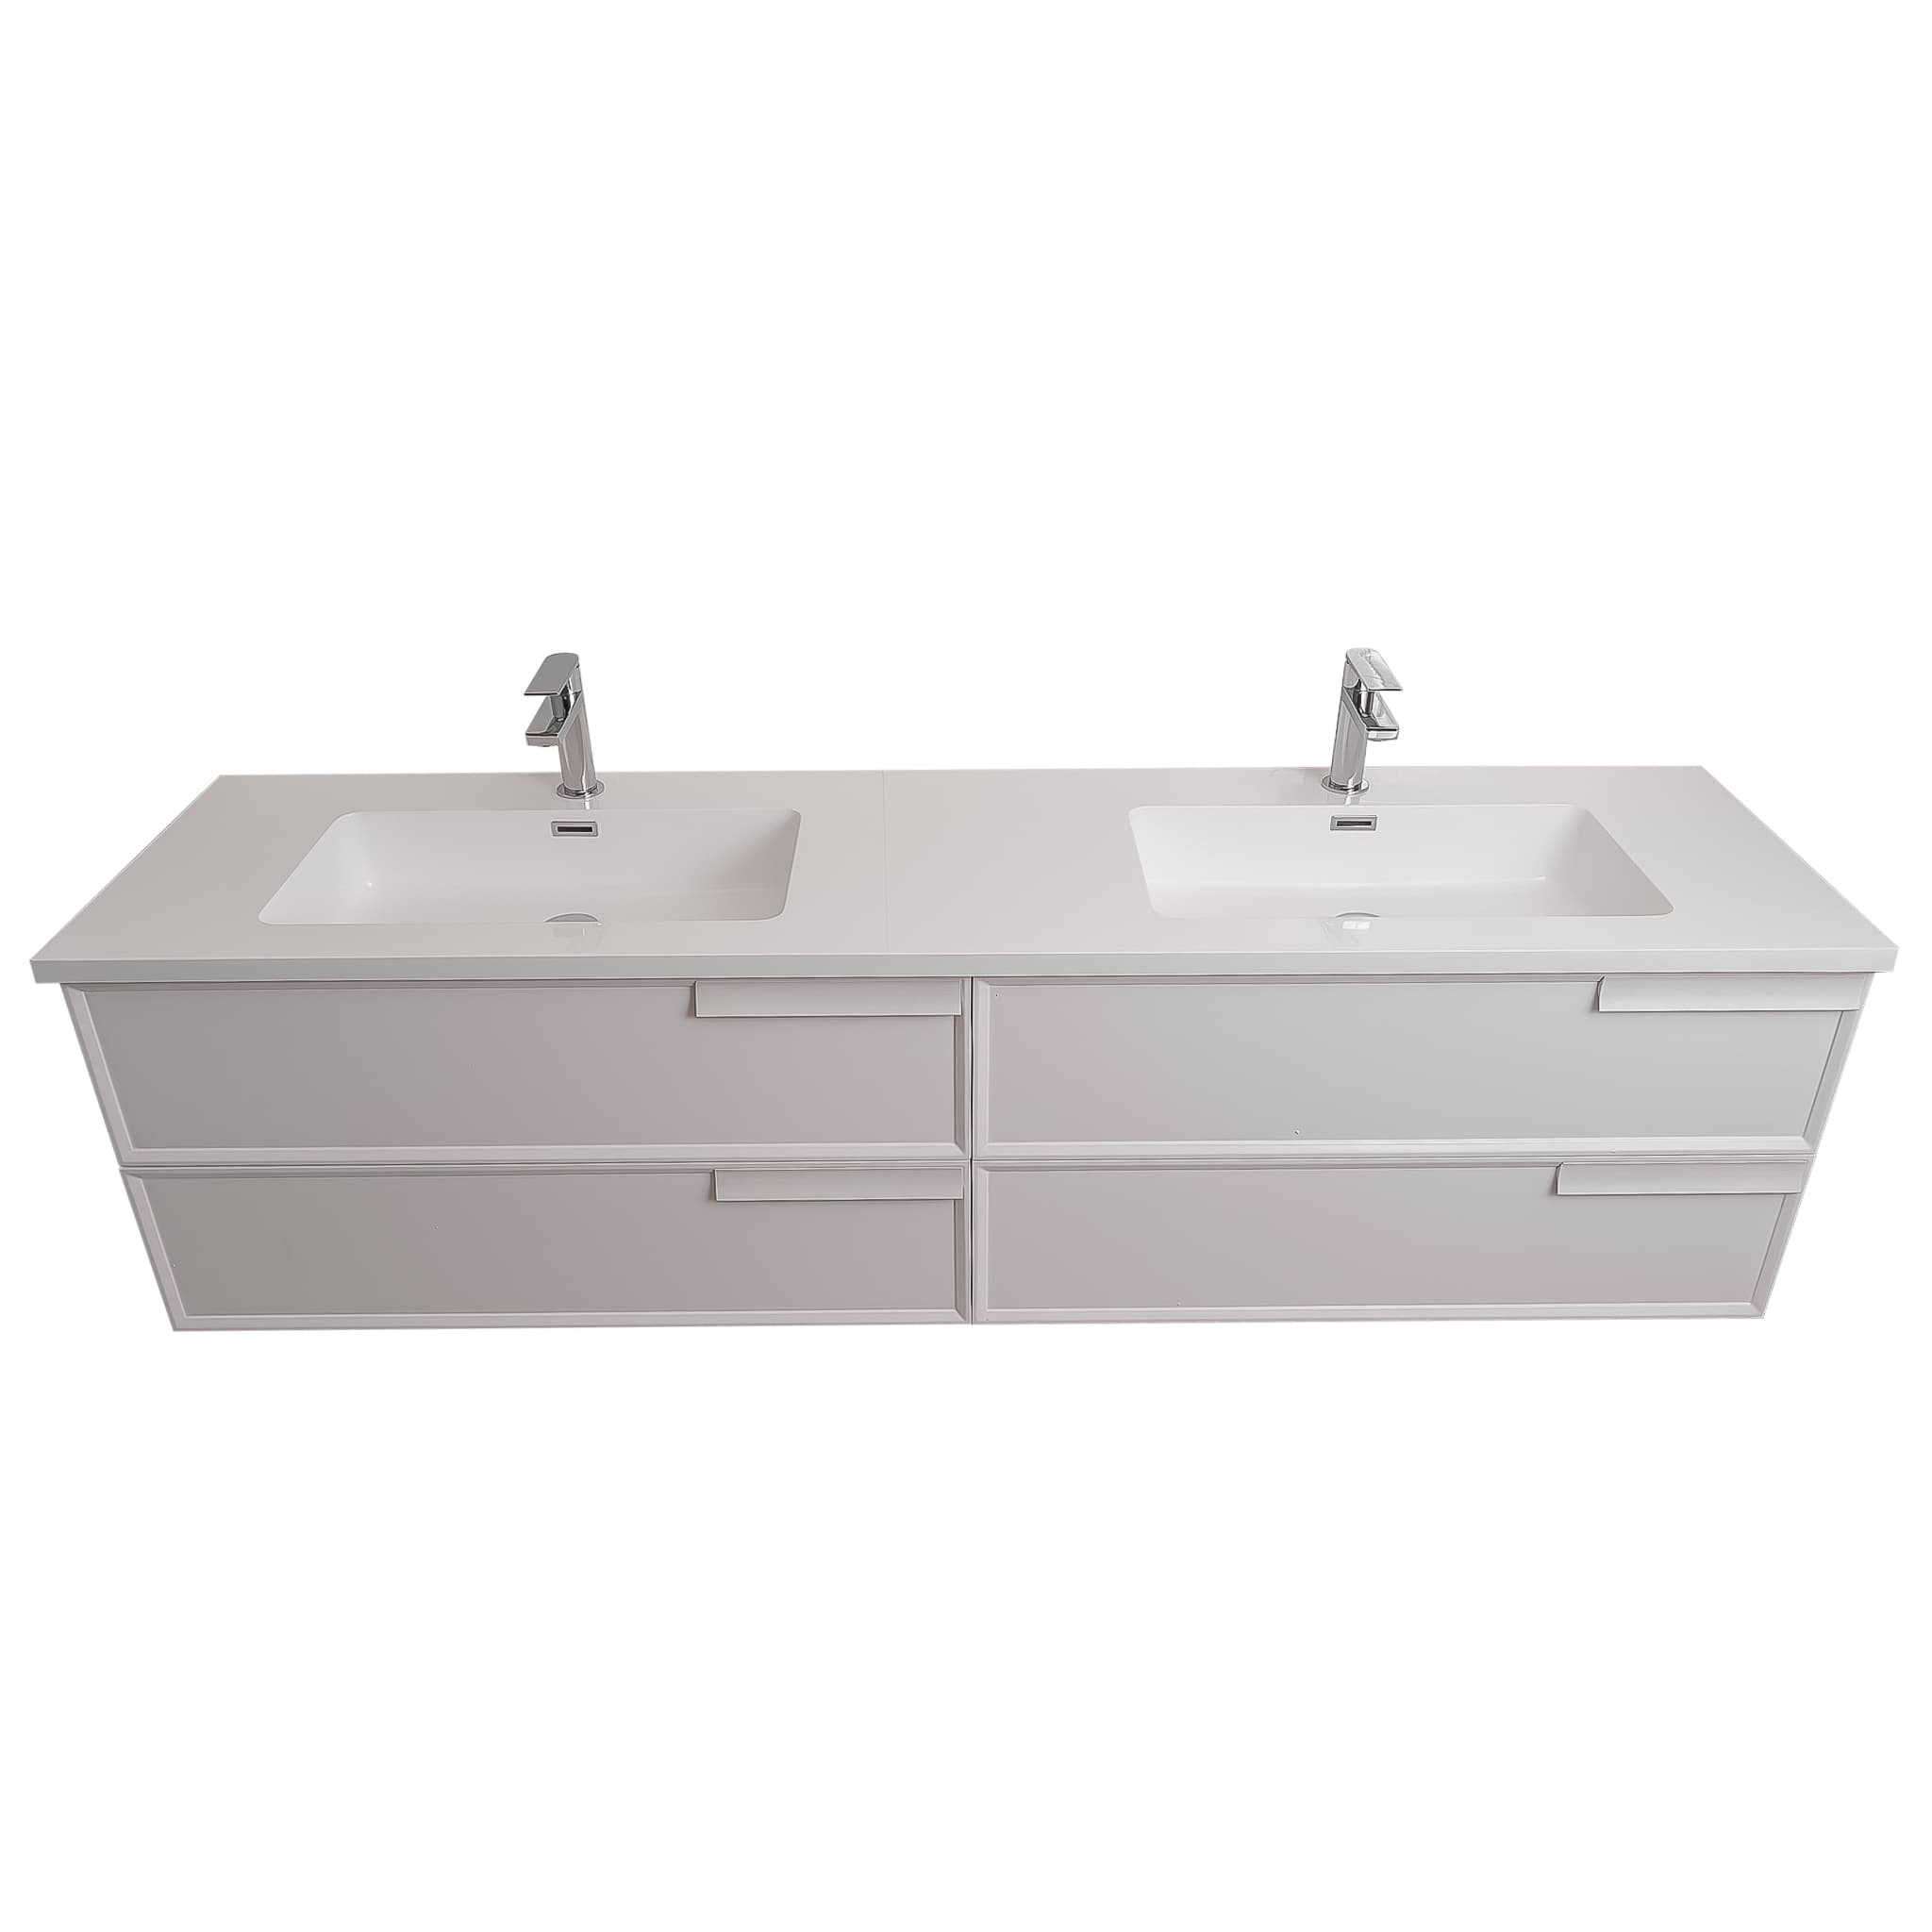 Garda 63 Matte White Cabinet, Square Cultured Marble Double Sink, Wall Mounted Modern Vanity Set